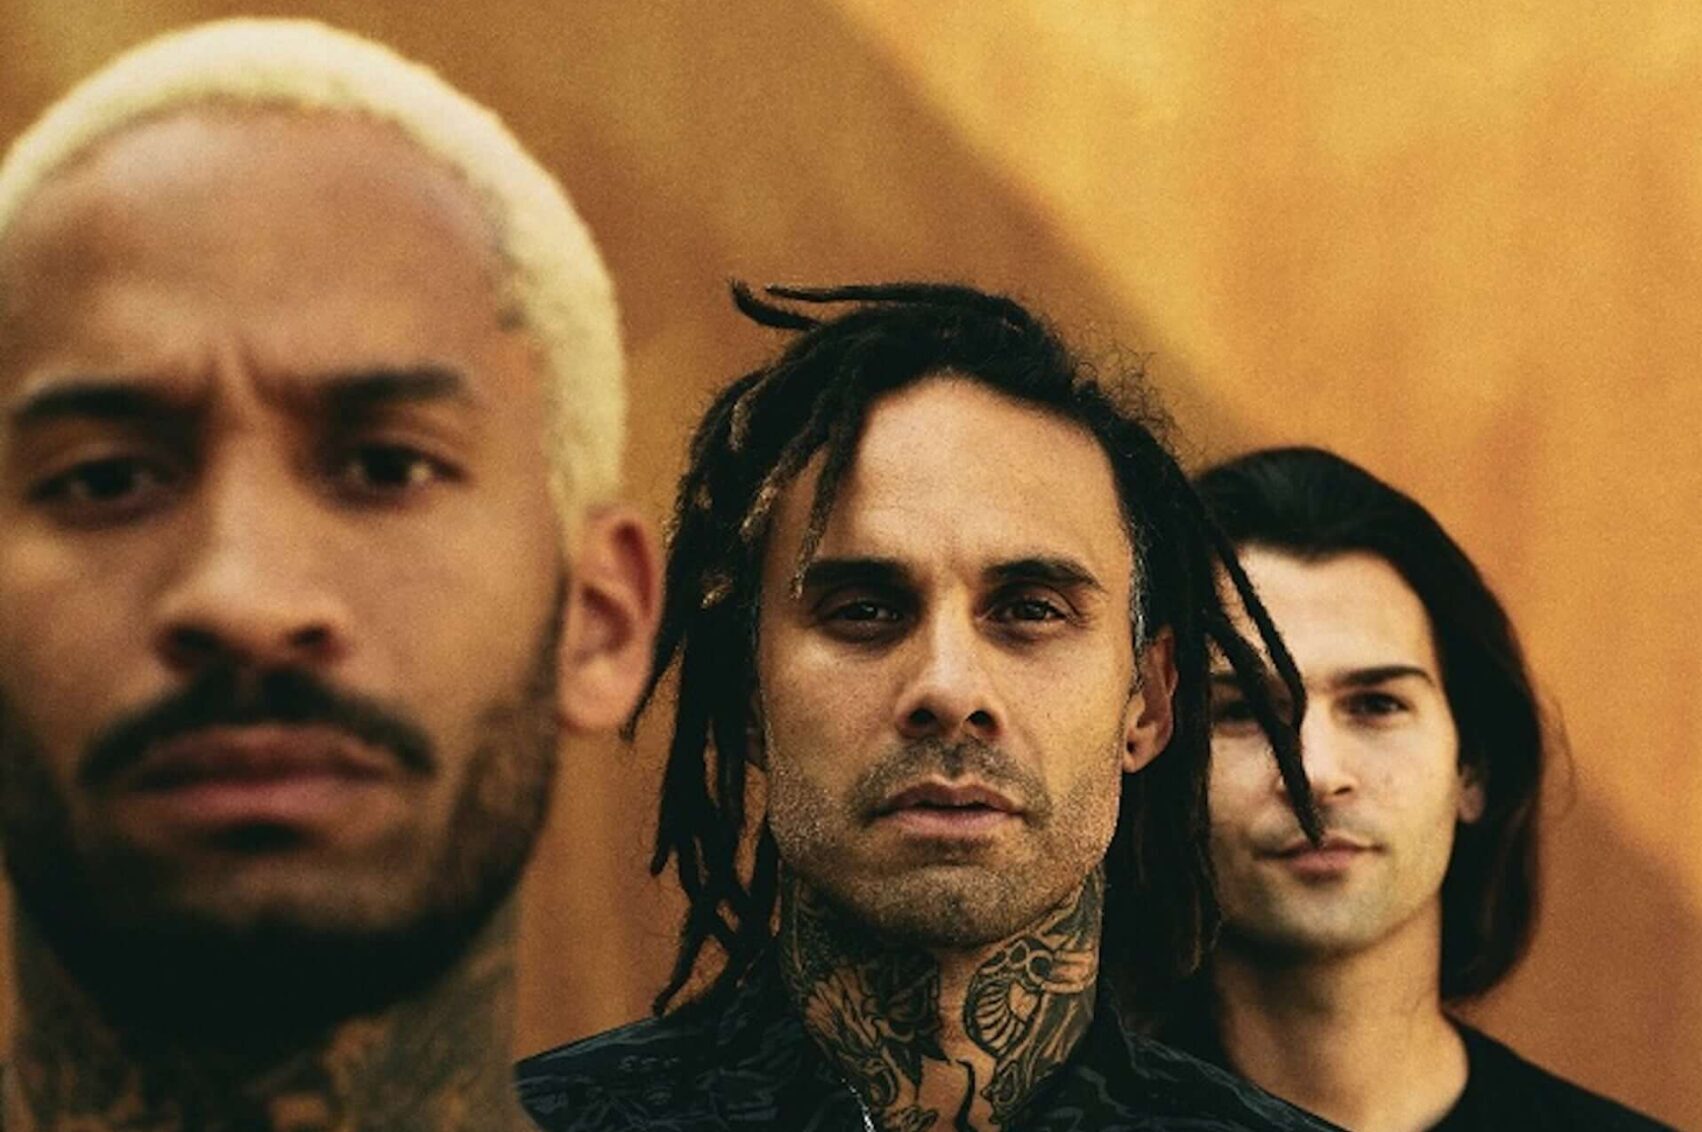 FEVER 333 ANNOUNCE ‘WRONG GENERATION TOWNHALL’ EVENT